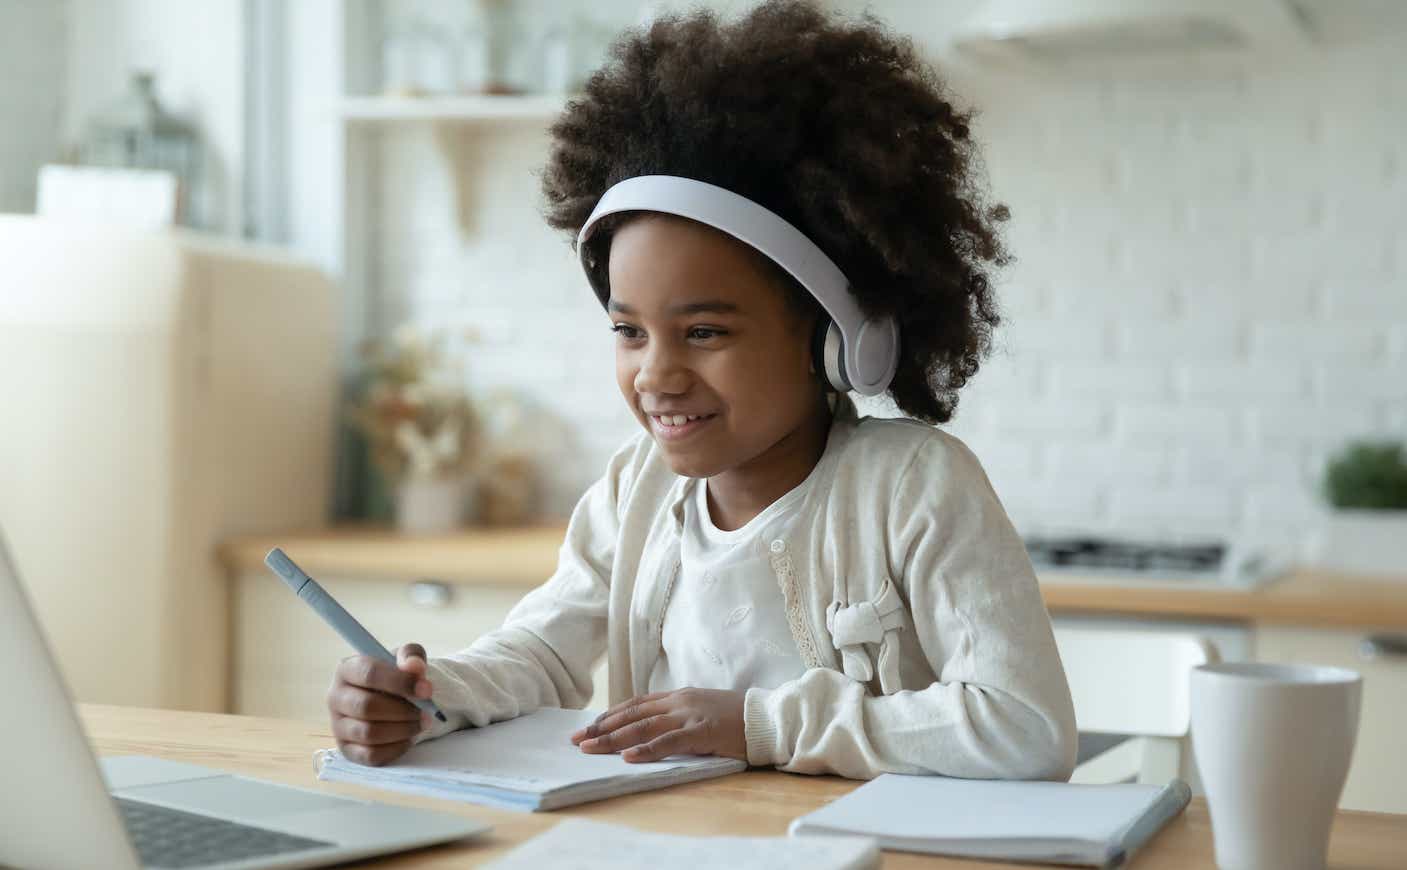 Smiling biracial girl watch video on laptop at home